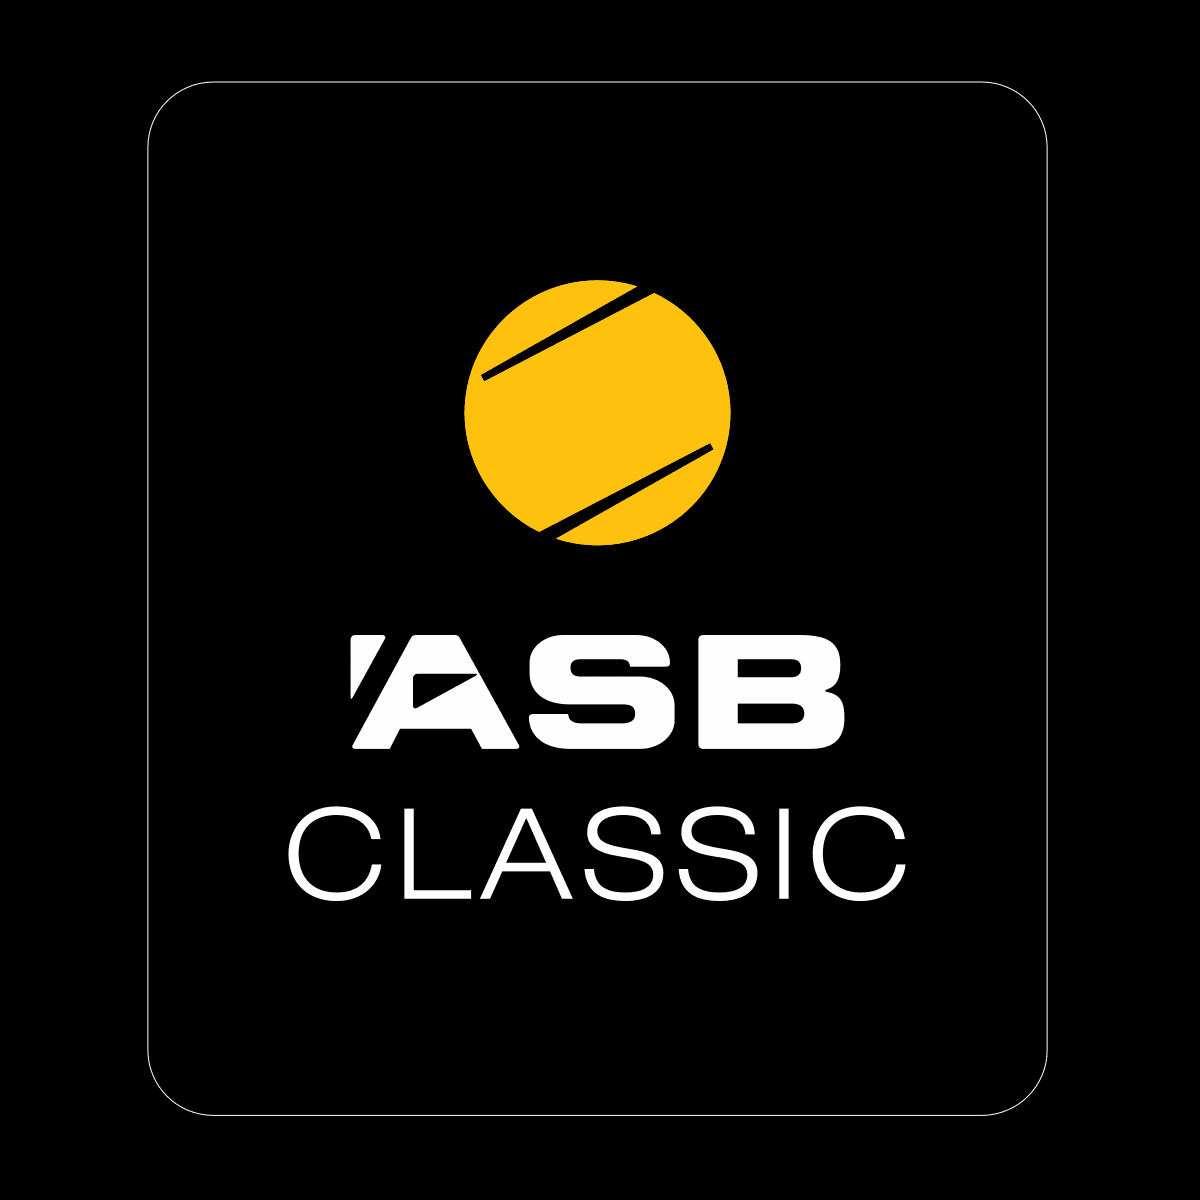 The ASB Classic is New Zealand's premier tennis tournament sitting on both the ATP and WTA tours